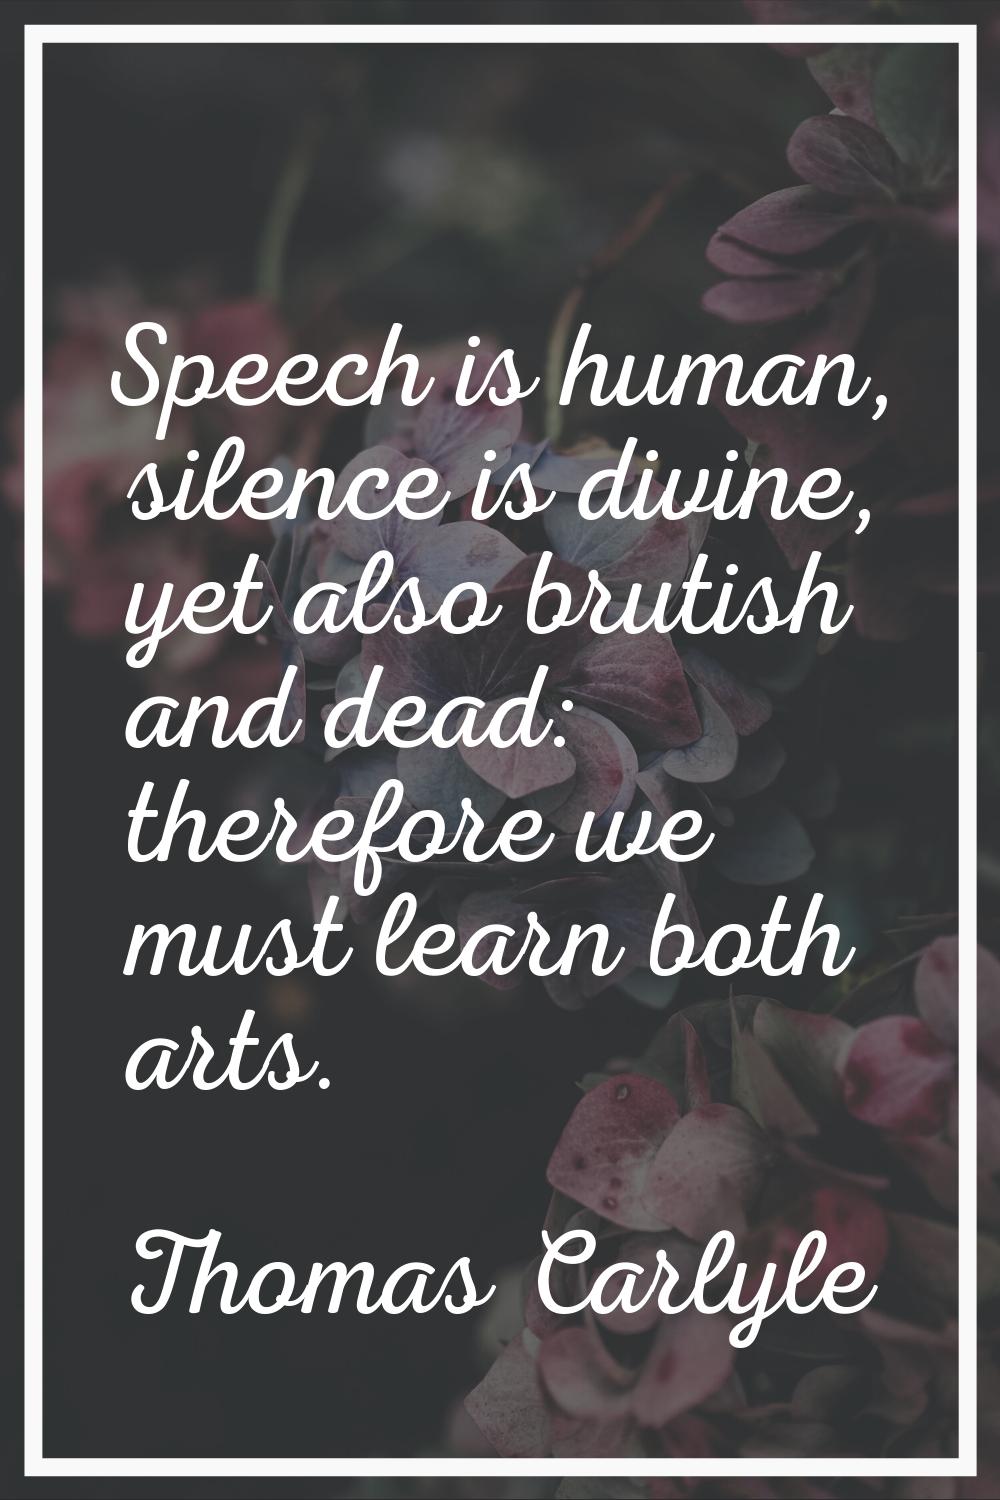 Speech is human, silence is divine, yet also brutish and dead: therefore we must learn both arts.